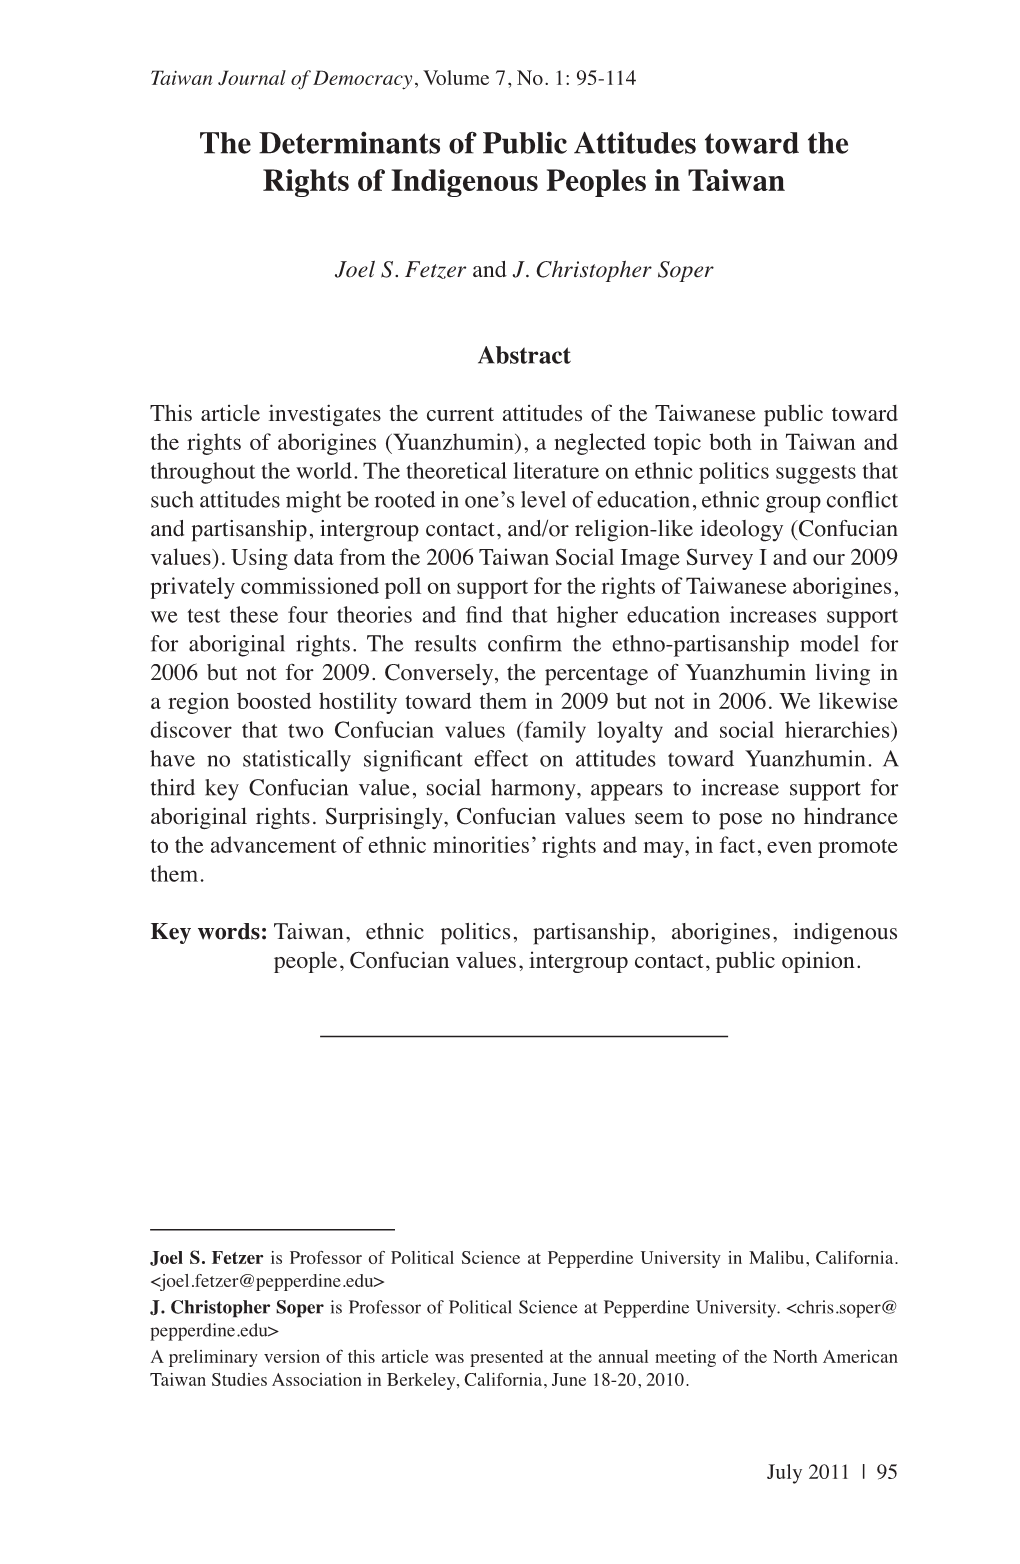 The Determinants of Public Attitudes Toward the Rights of Indigenous Peoples in Taiwan